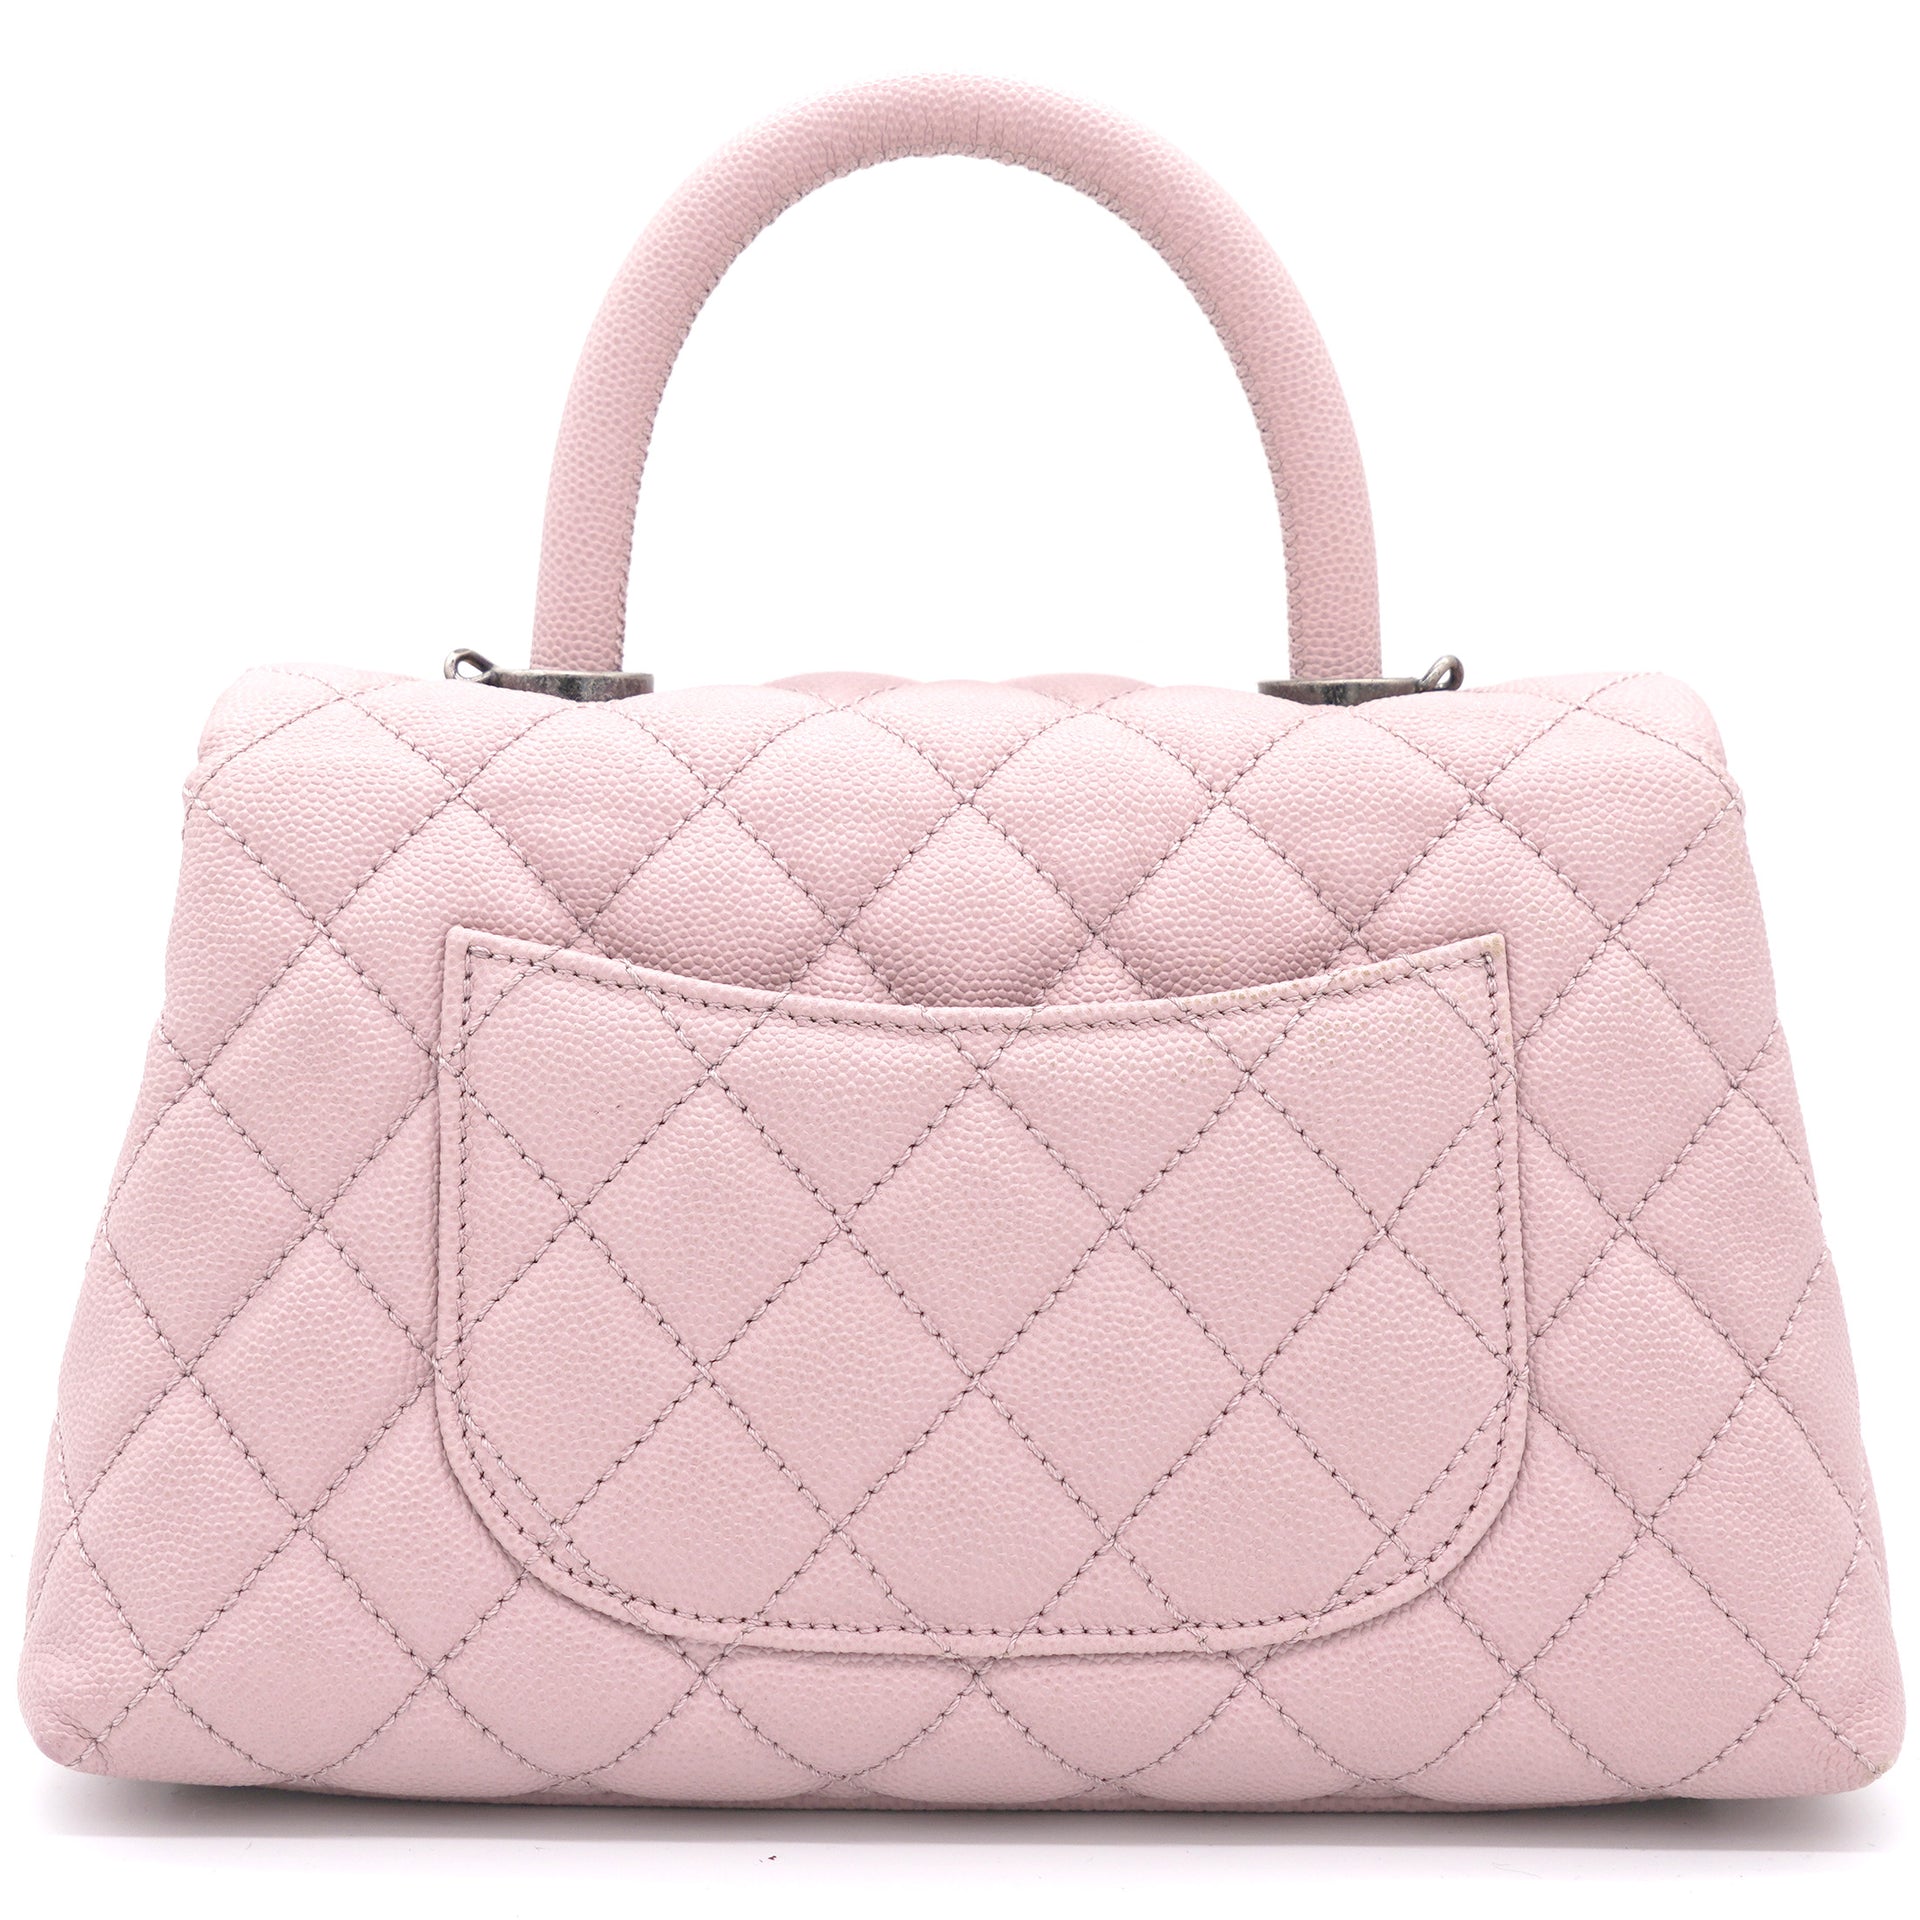 CHANEL Flap Bag with Top Handle Iridescent Grained Calfskin  Gradient  Lacquered Metal Light Pink  A92990B06817NF498  New th  Chanel bag  Bags Chanel flap bag